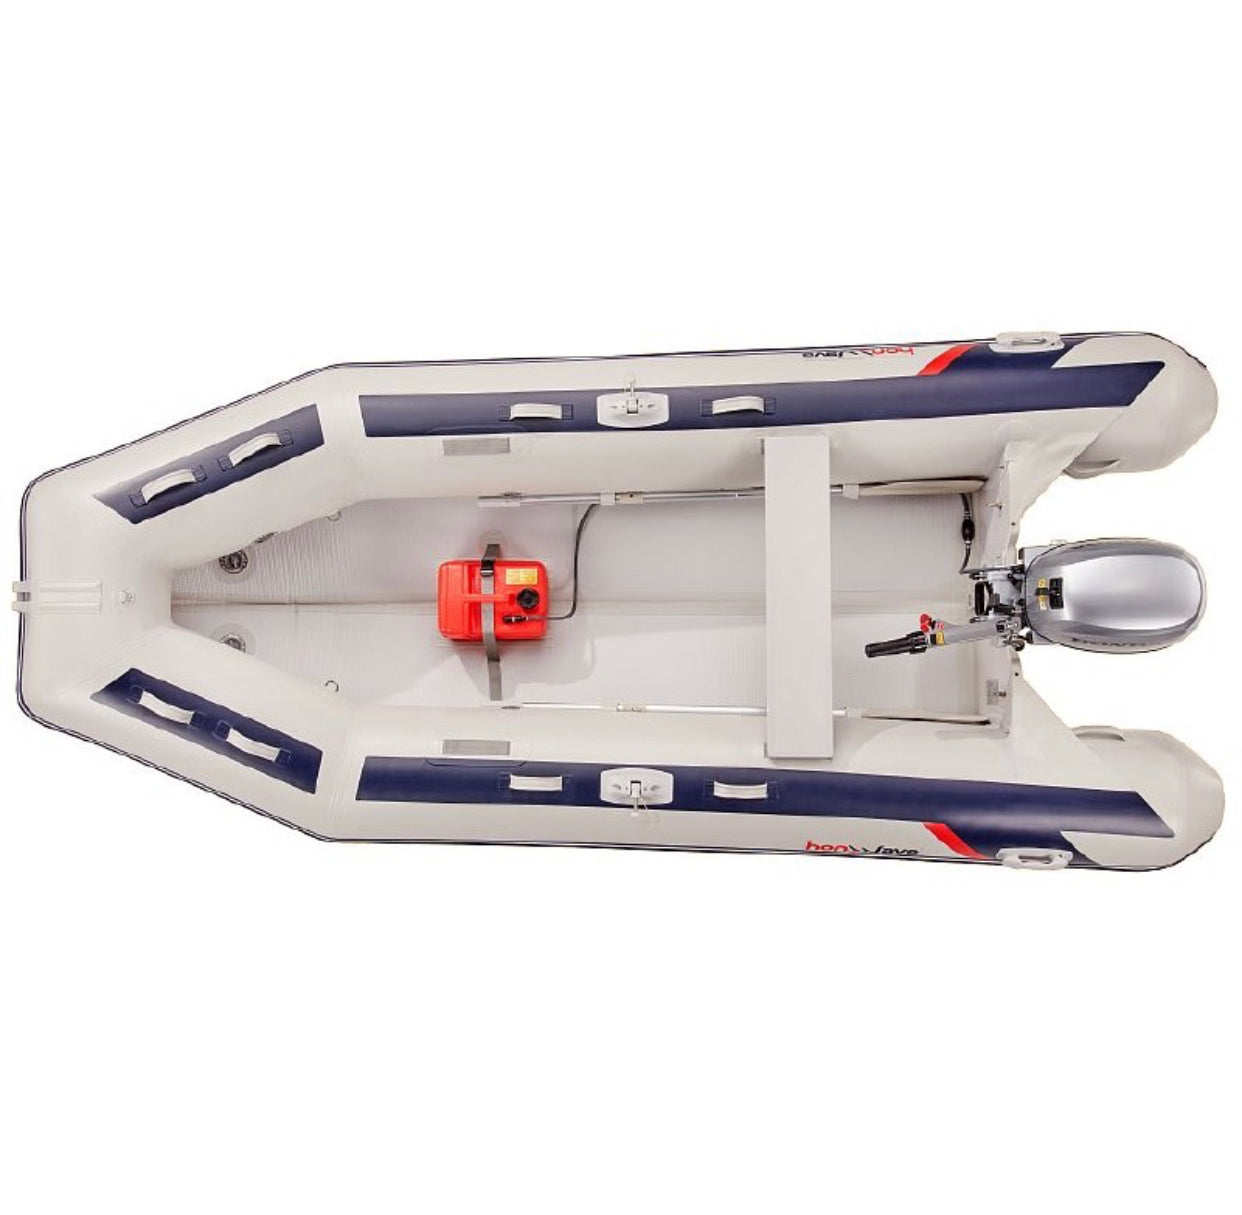 Honwave T38 3.8m Inflatable Dinghy Tender Boat with Inflatable V-Floor